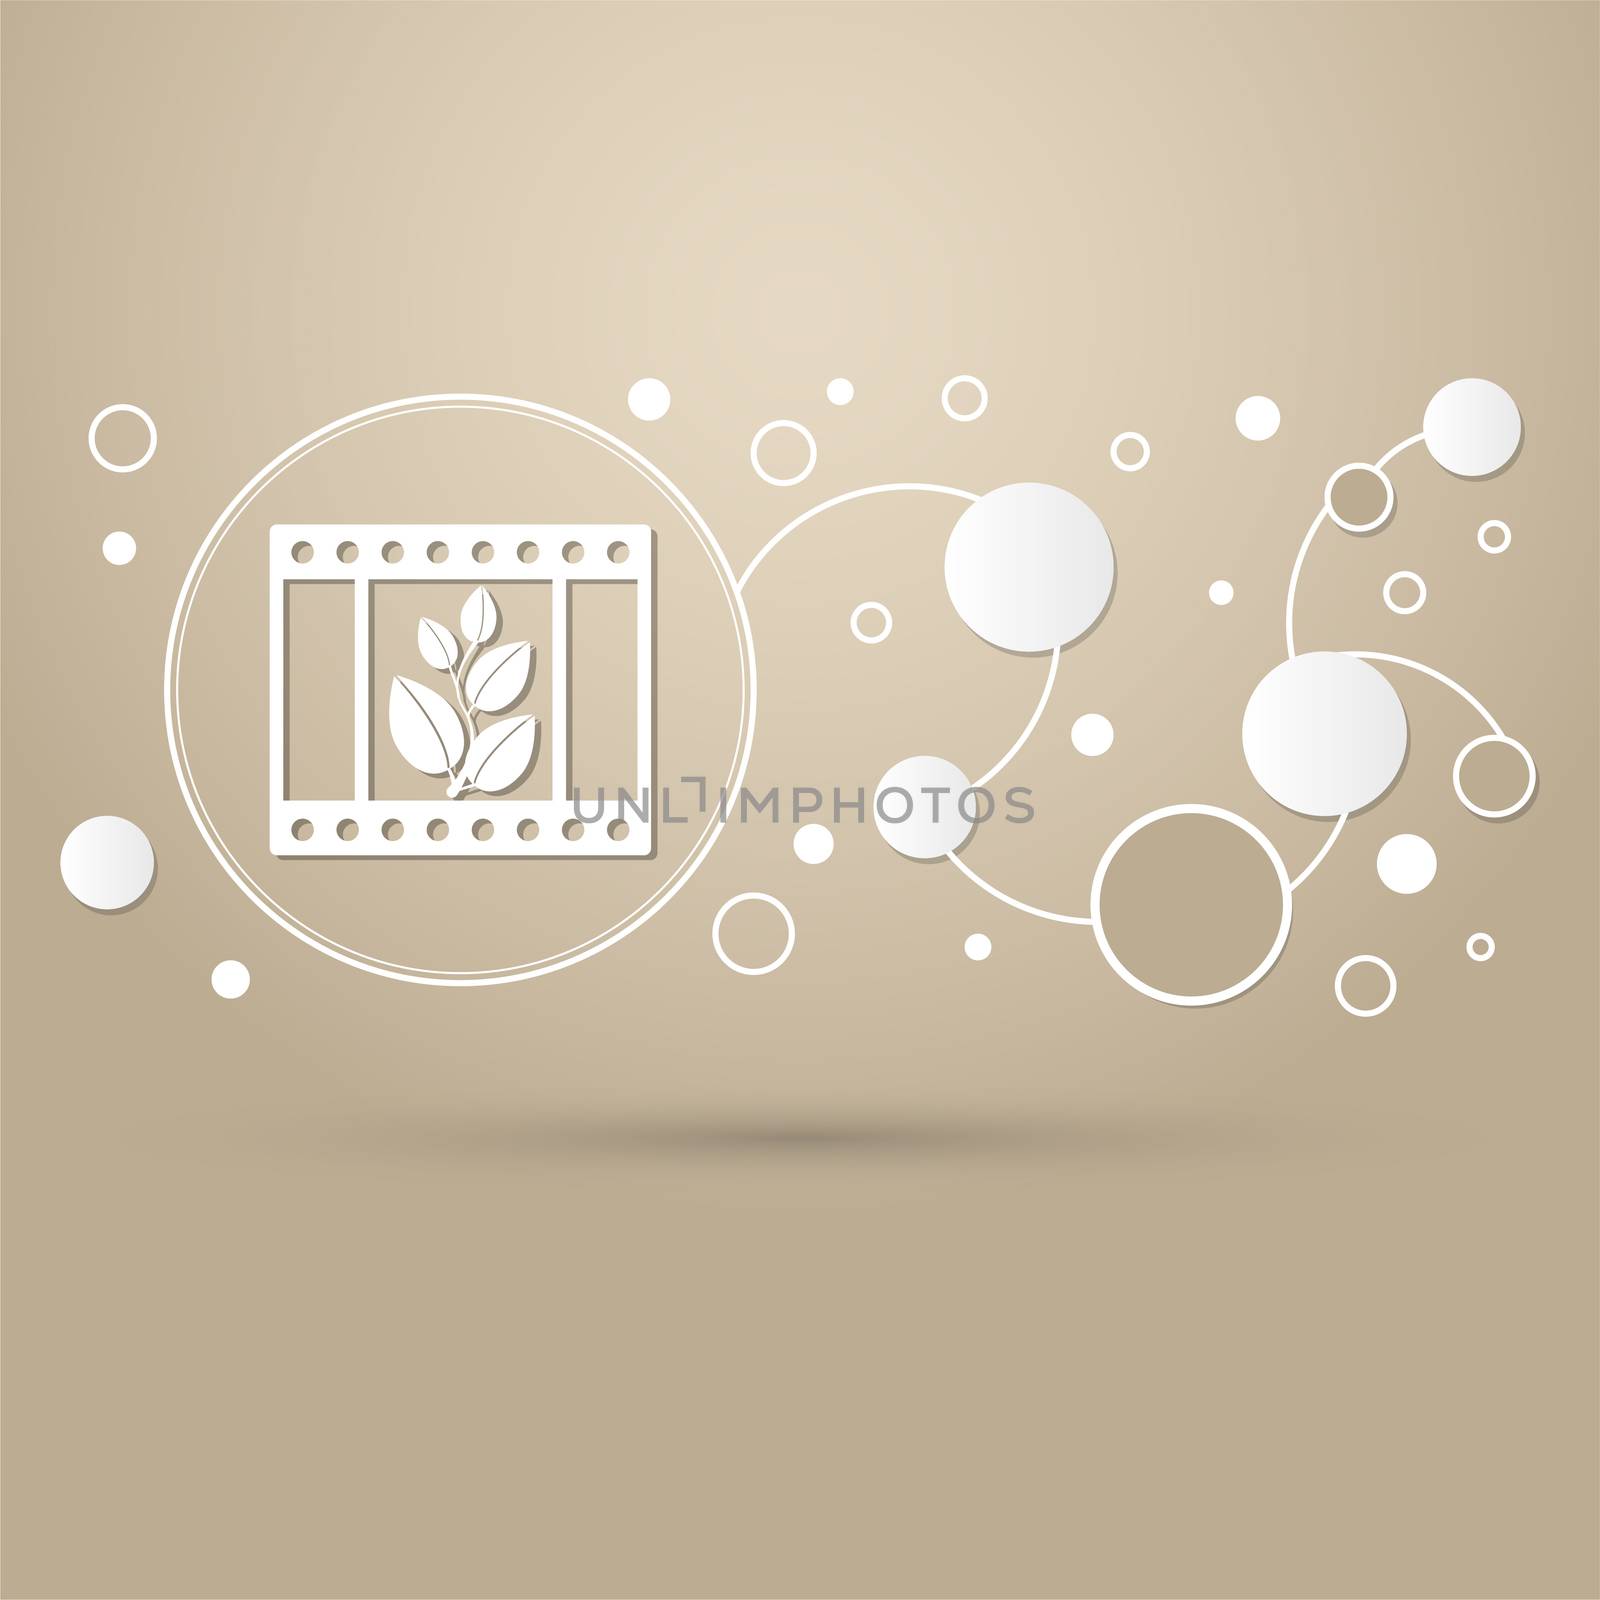 film Icon on a brown background with elegant style and modern design infographic.  by Adamchuk